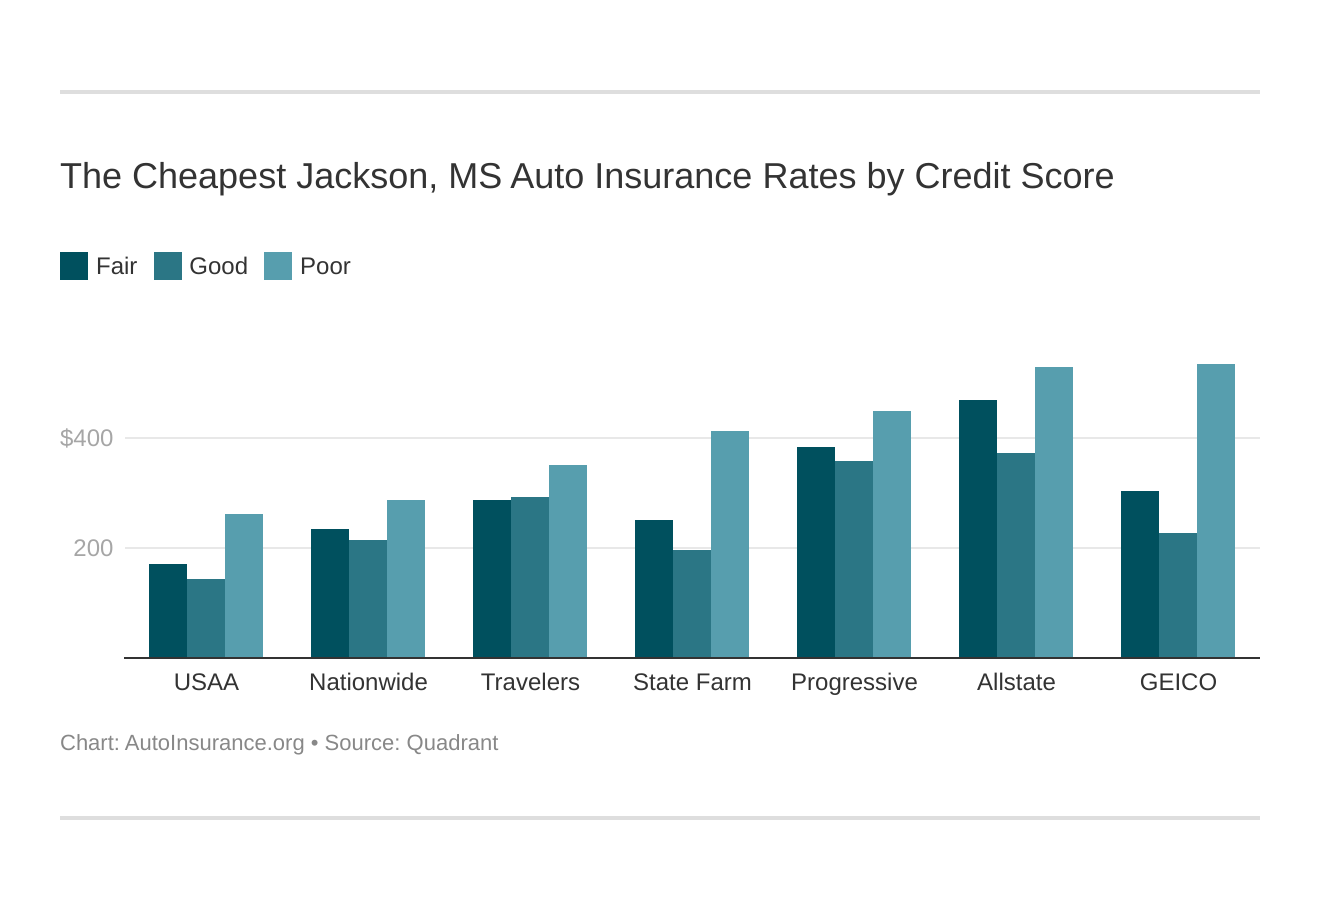 The Cheapest Jackson, MS Auto Insurance Rates by Credit Score